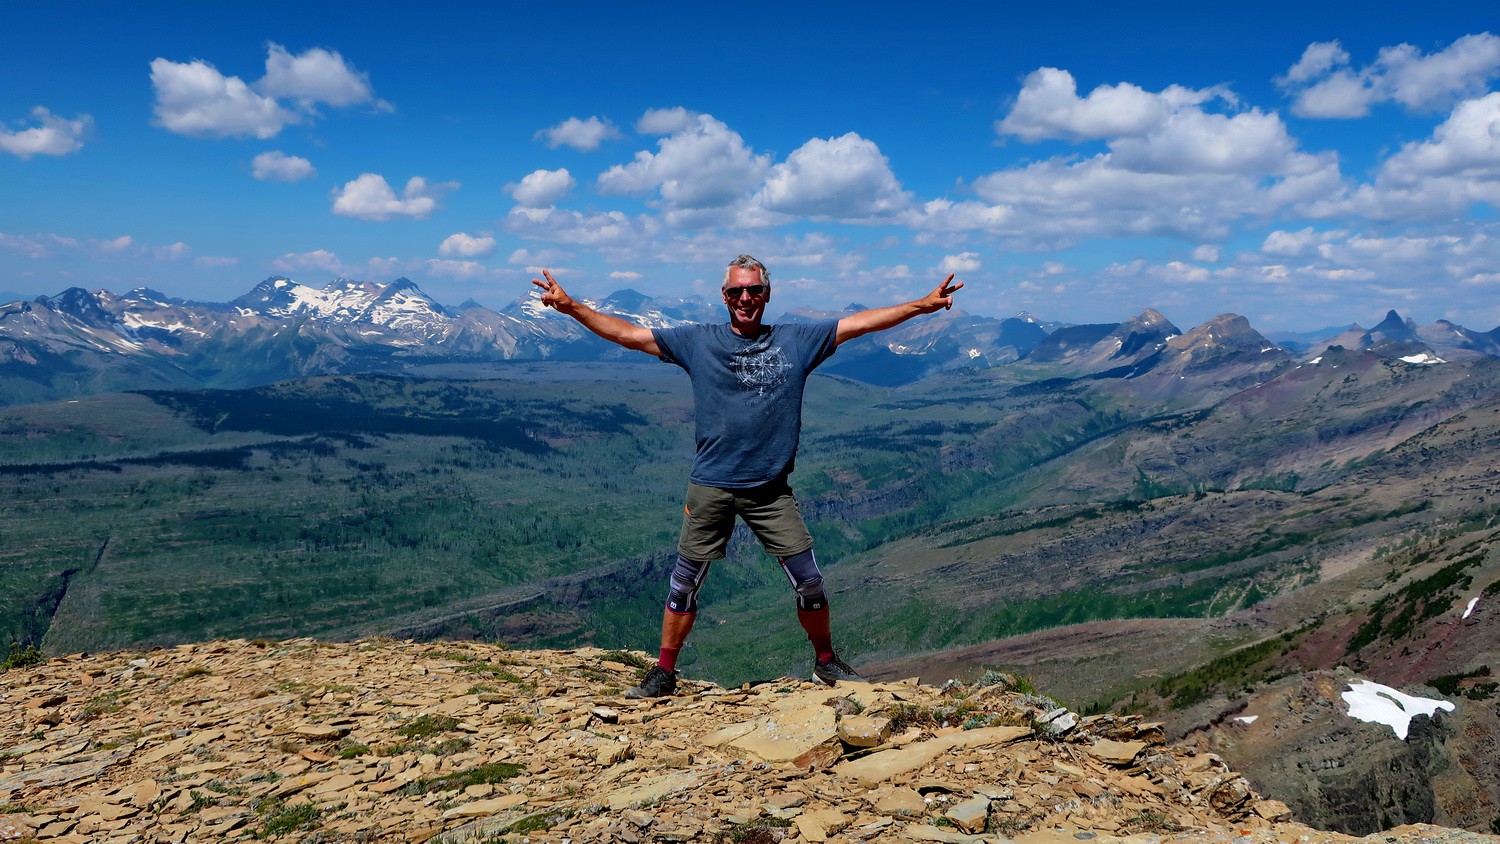 Alfred on top of Swiftcurrent Mountain